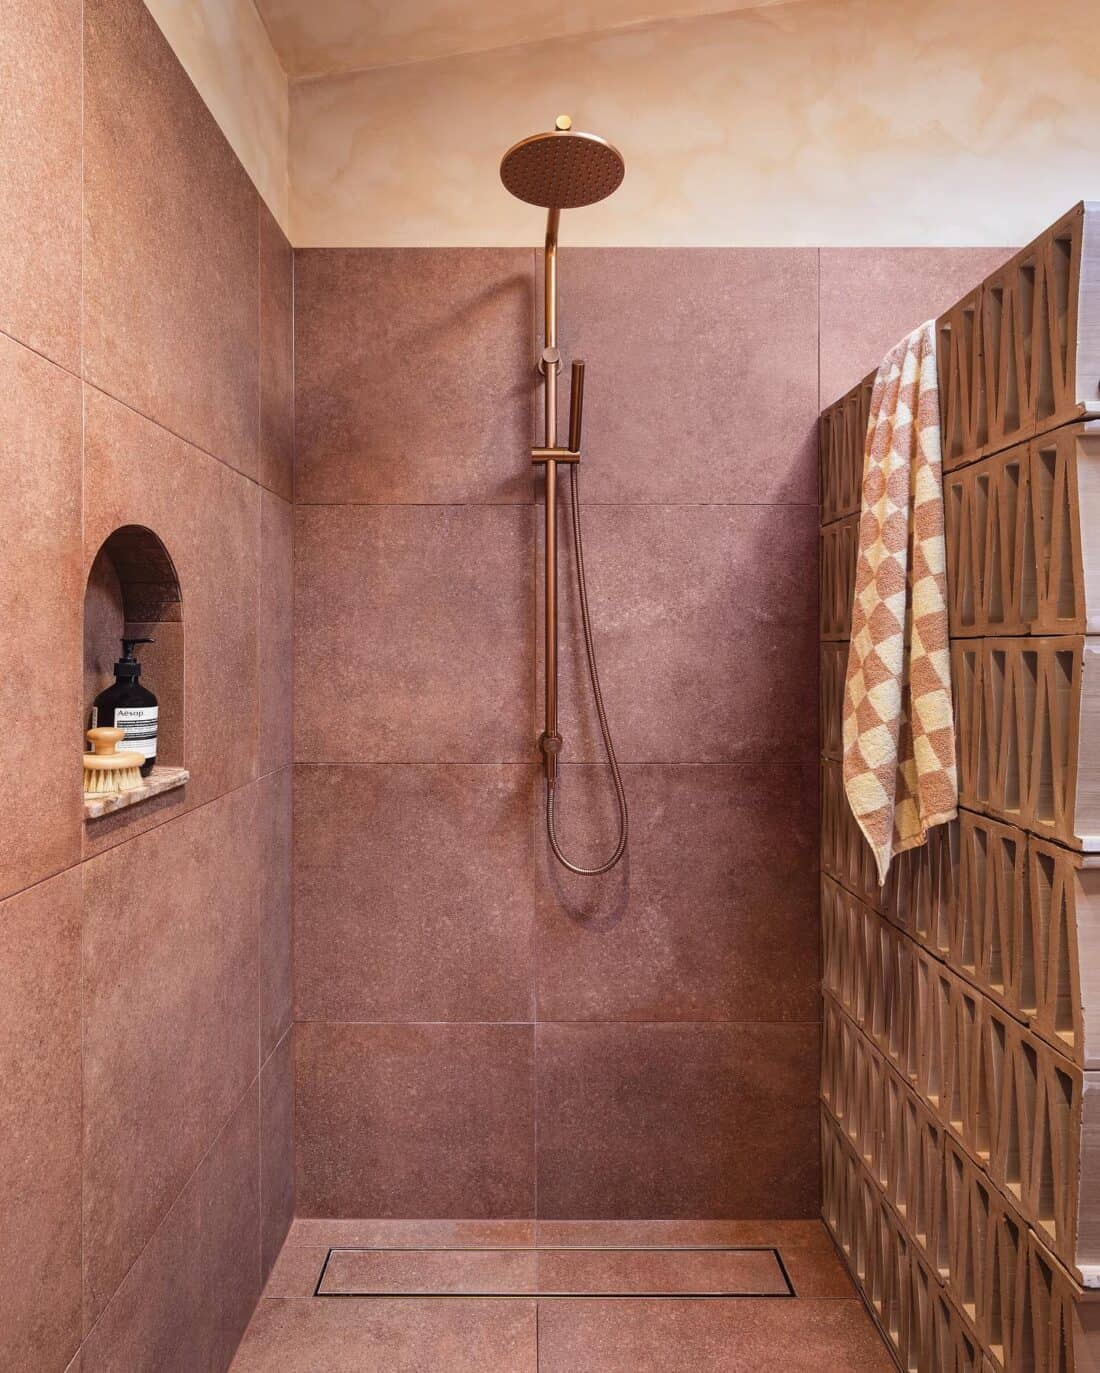 A modern outdoor shower featuring terracotta tiles with a copper rainfall shower head, a hand-held shower, and built-in shelves. A decorative towel hangs on the side.